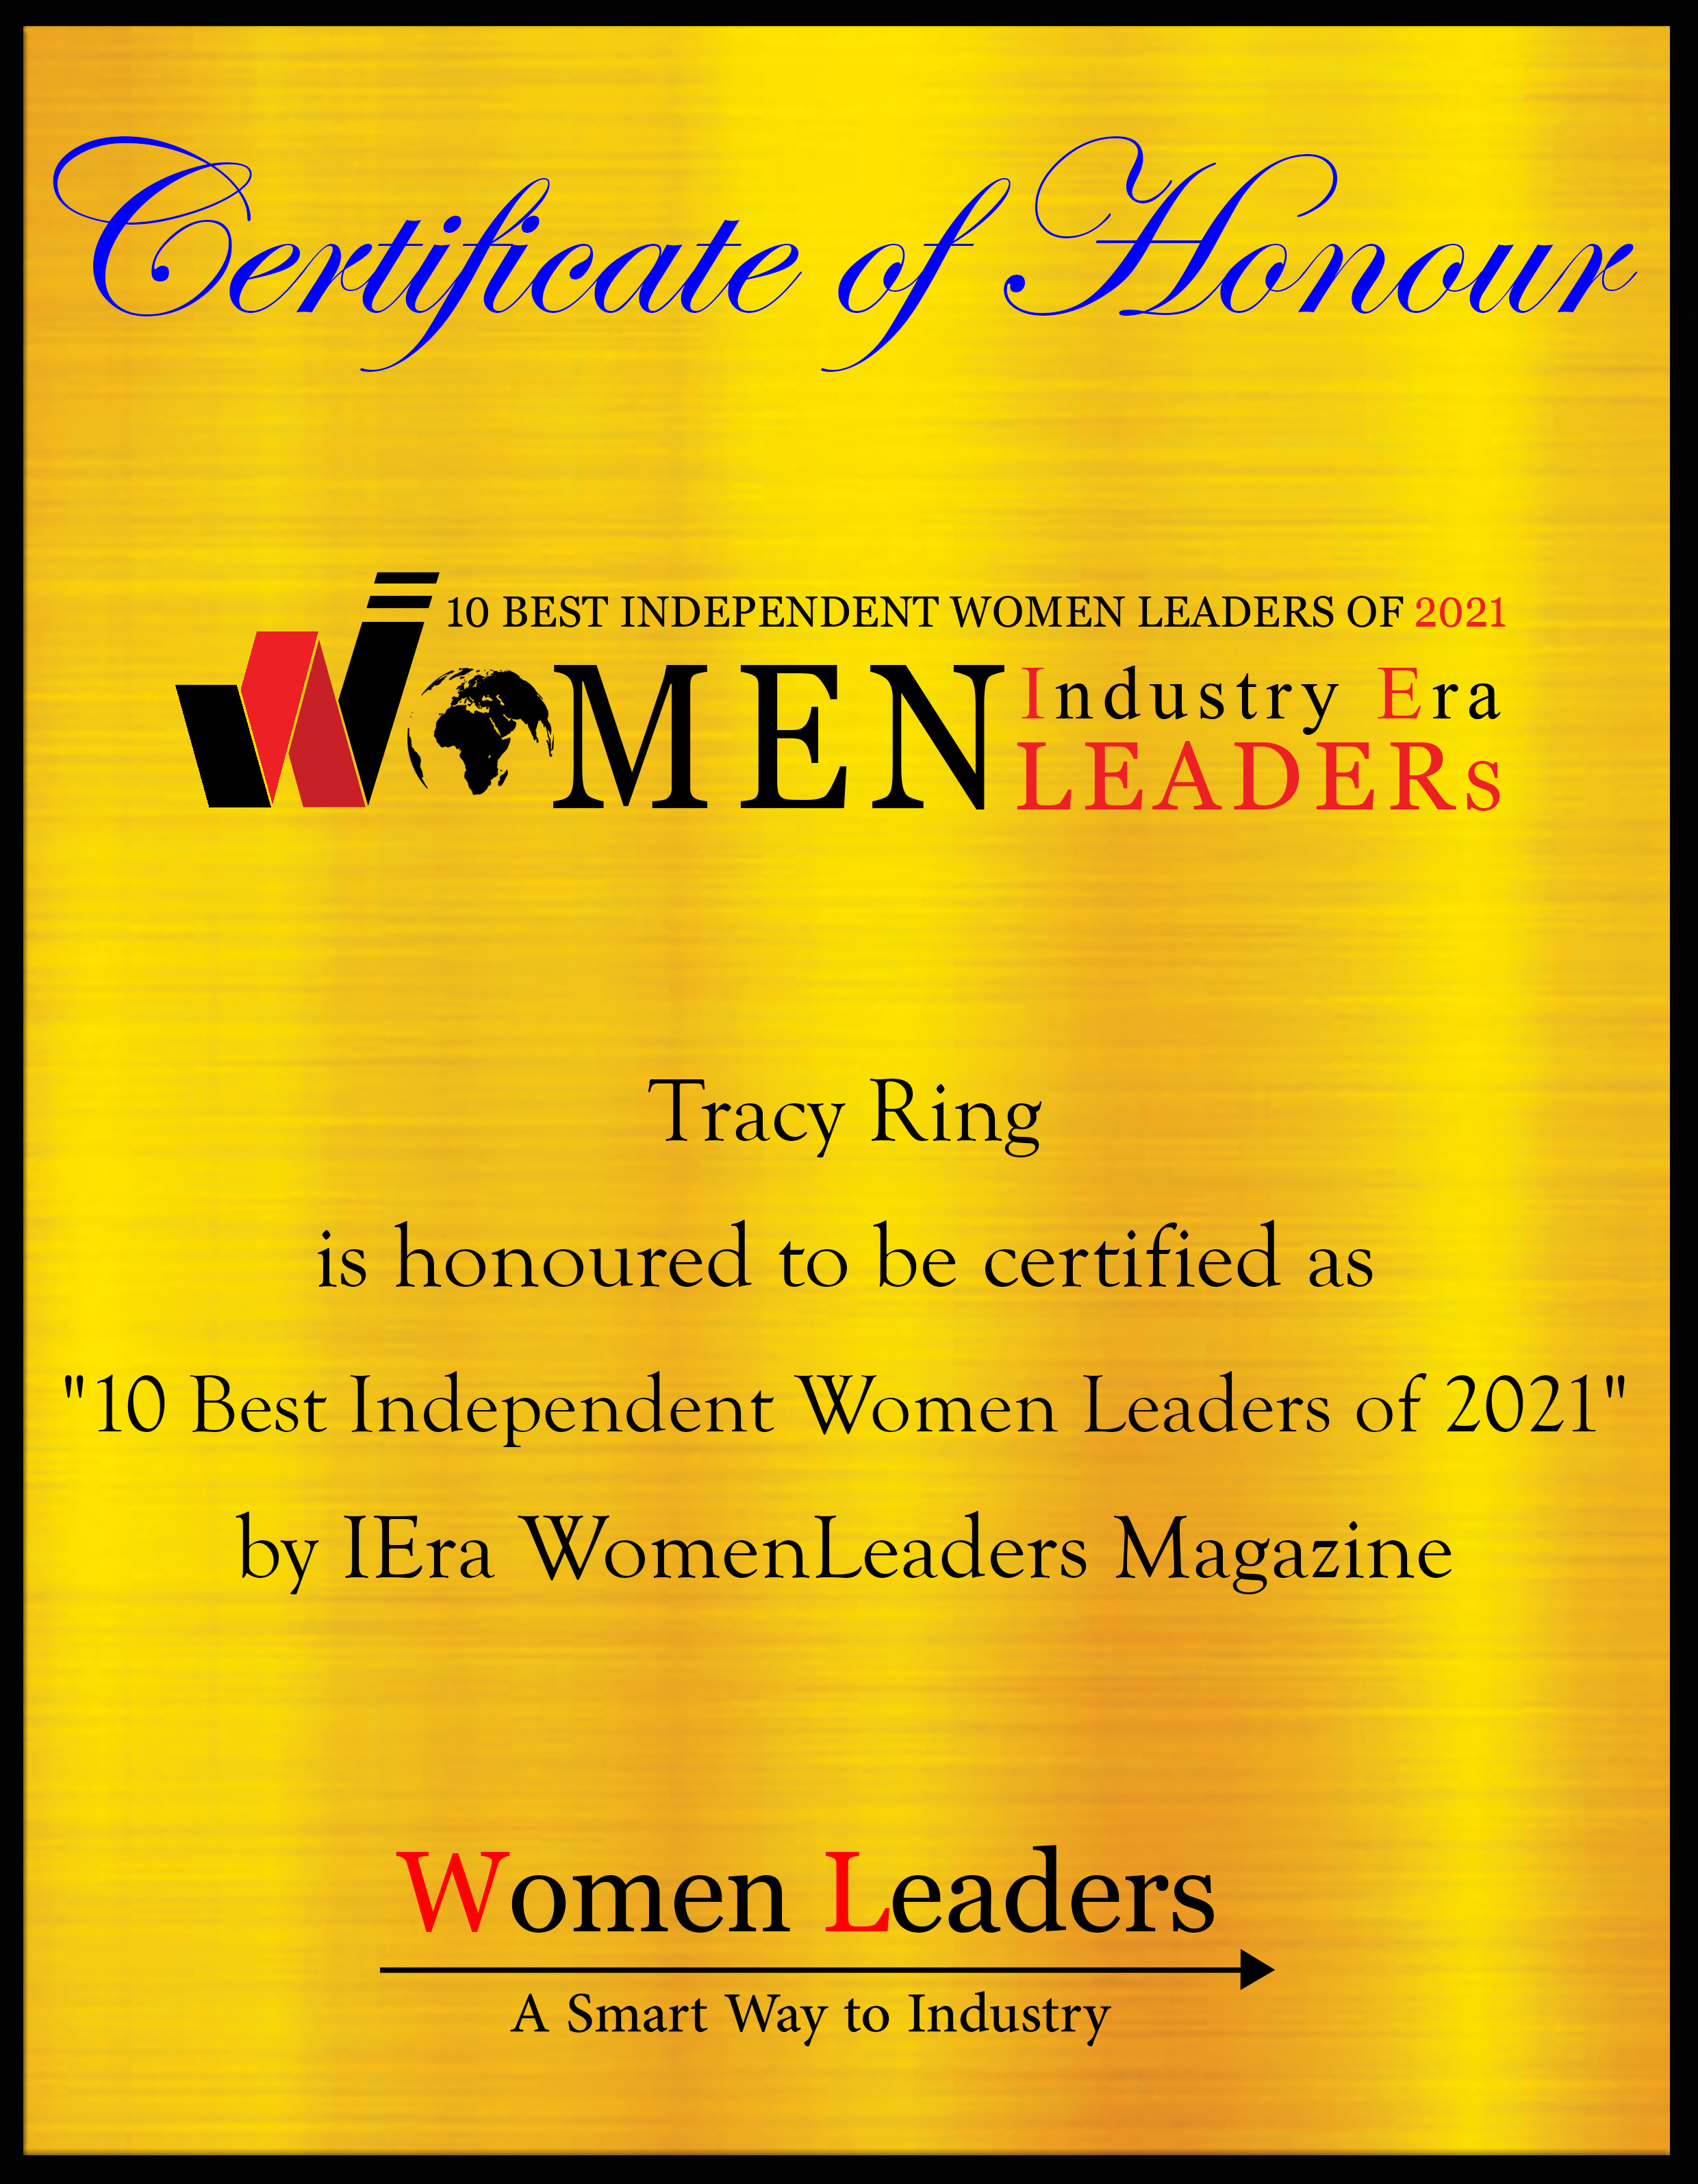 Tracy Ring, Global Managing Director of Accenture, Best Independent Women Leaders of 2021